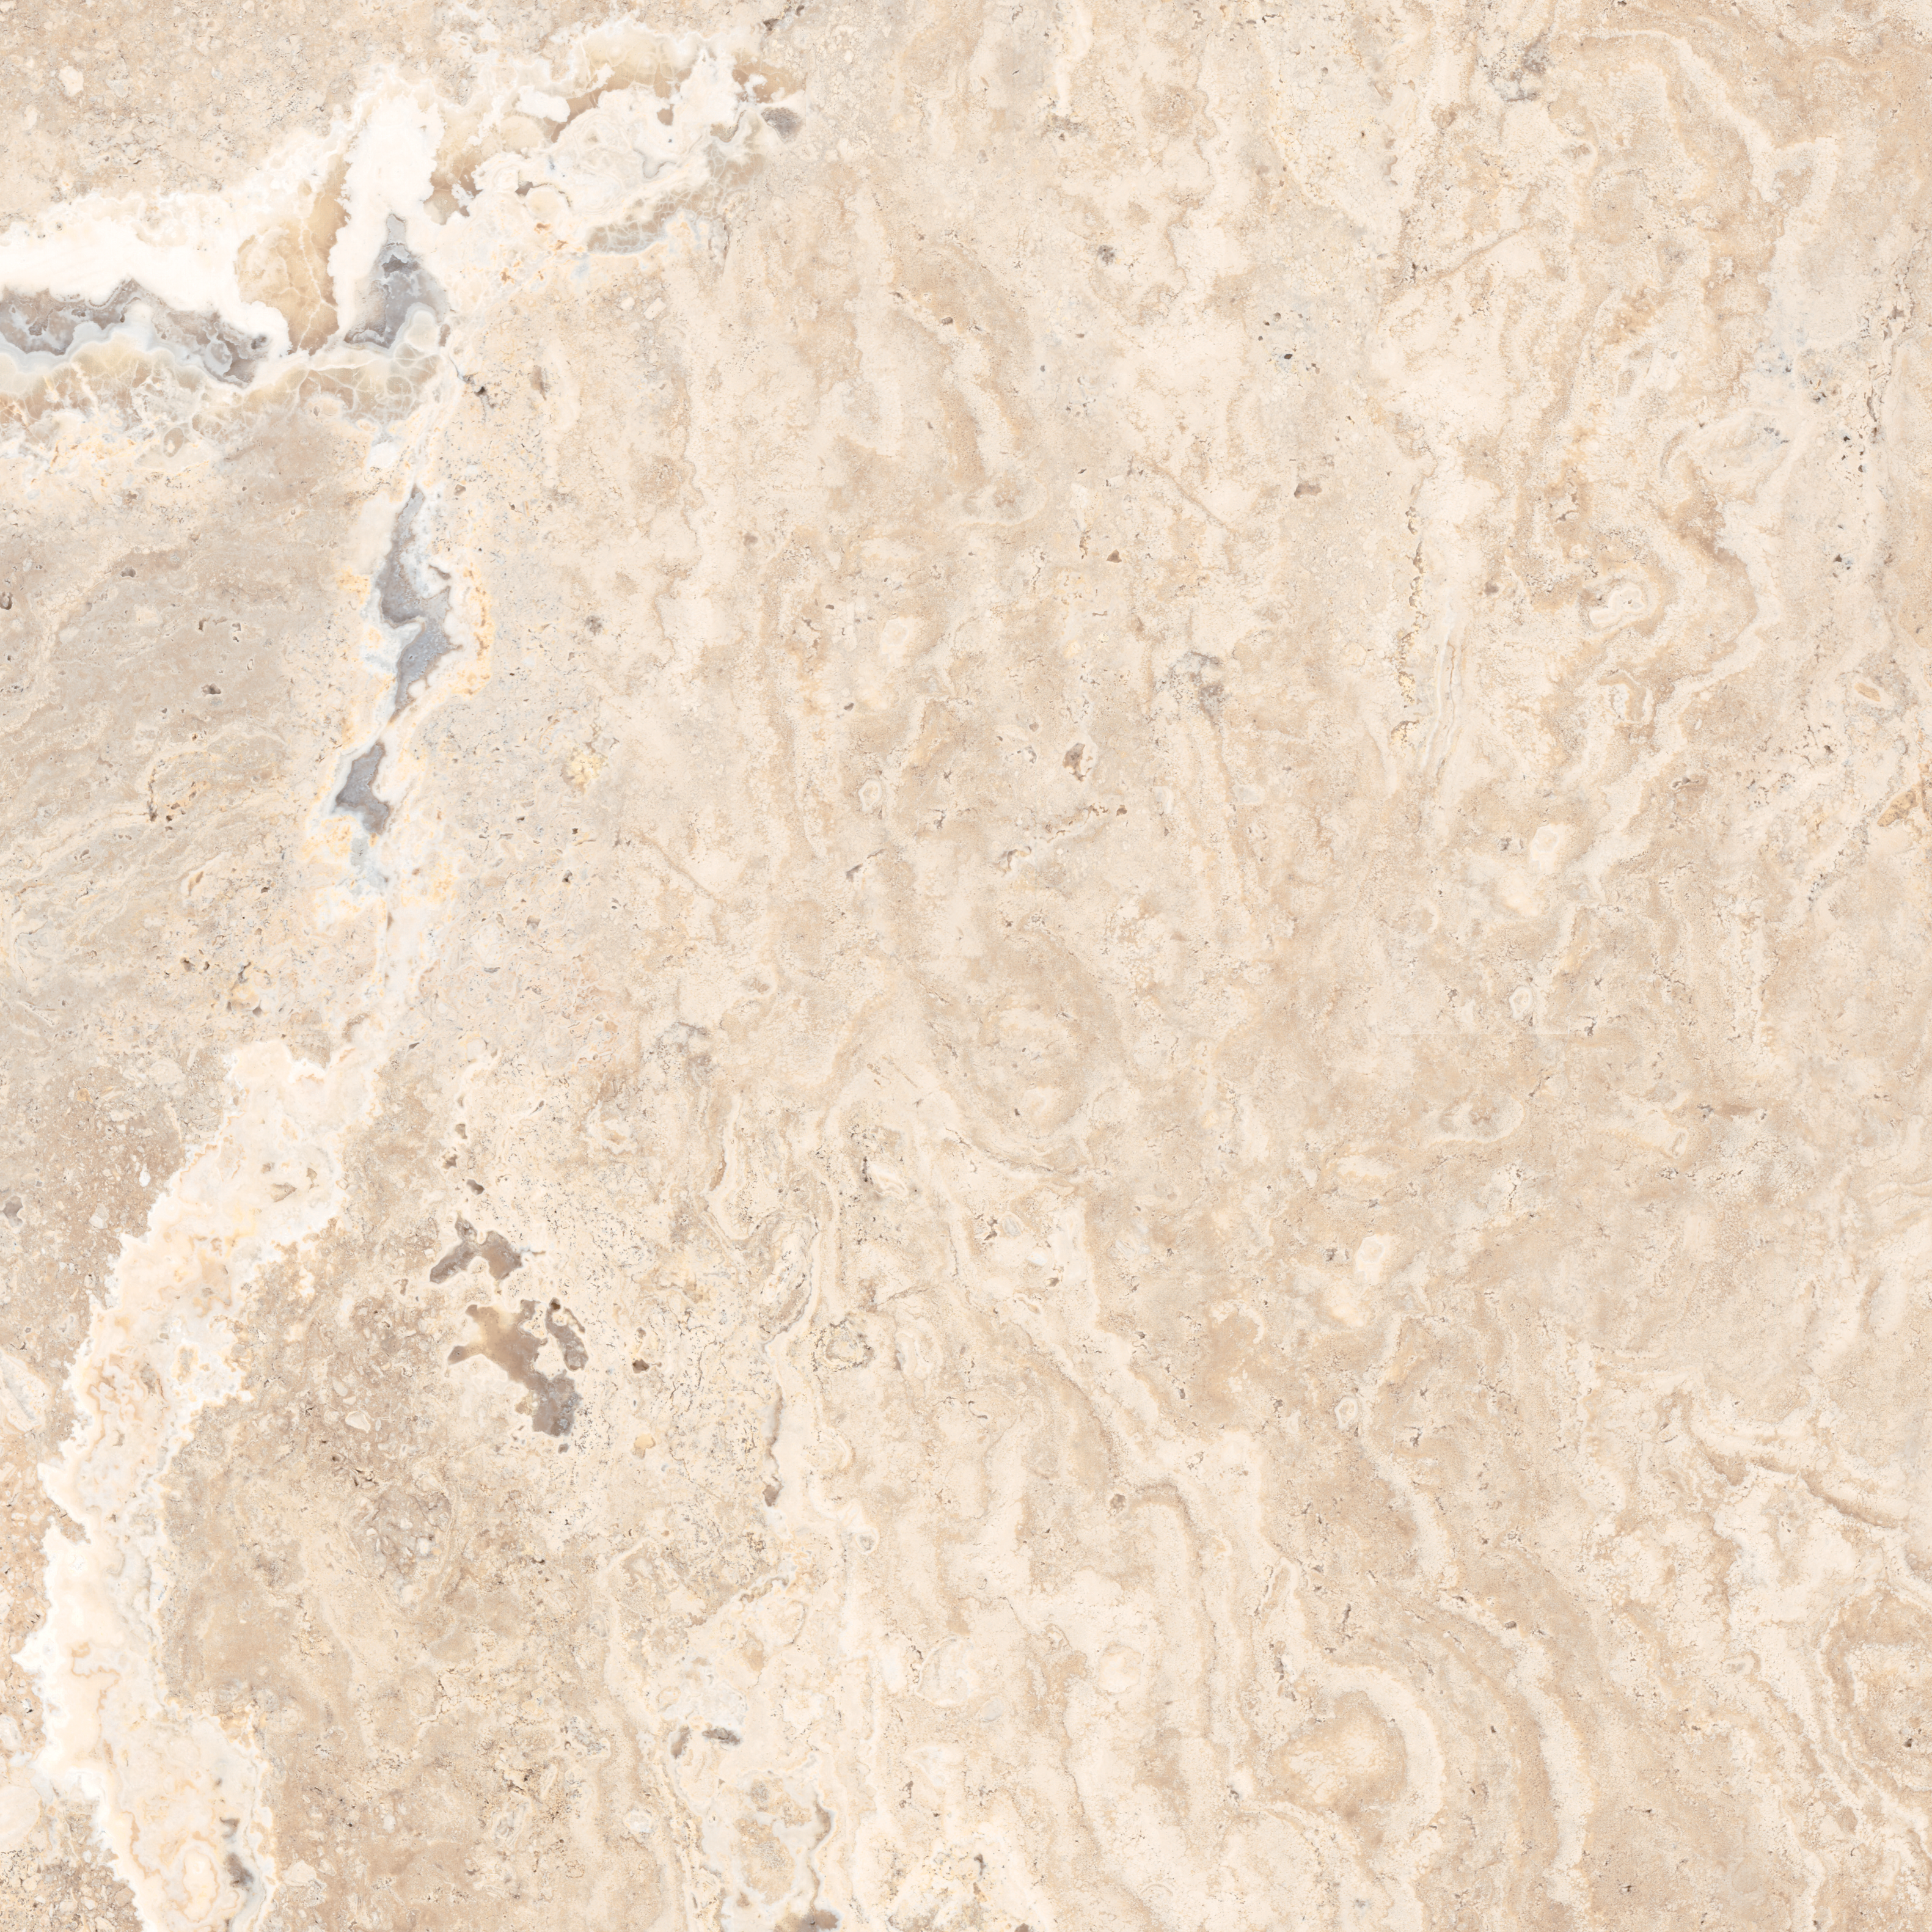 sand pattern glazed porcelain field tile from antico anatolia collection distributed by surface group international matte finish pressed edge 18x18 square shape